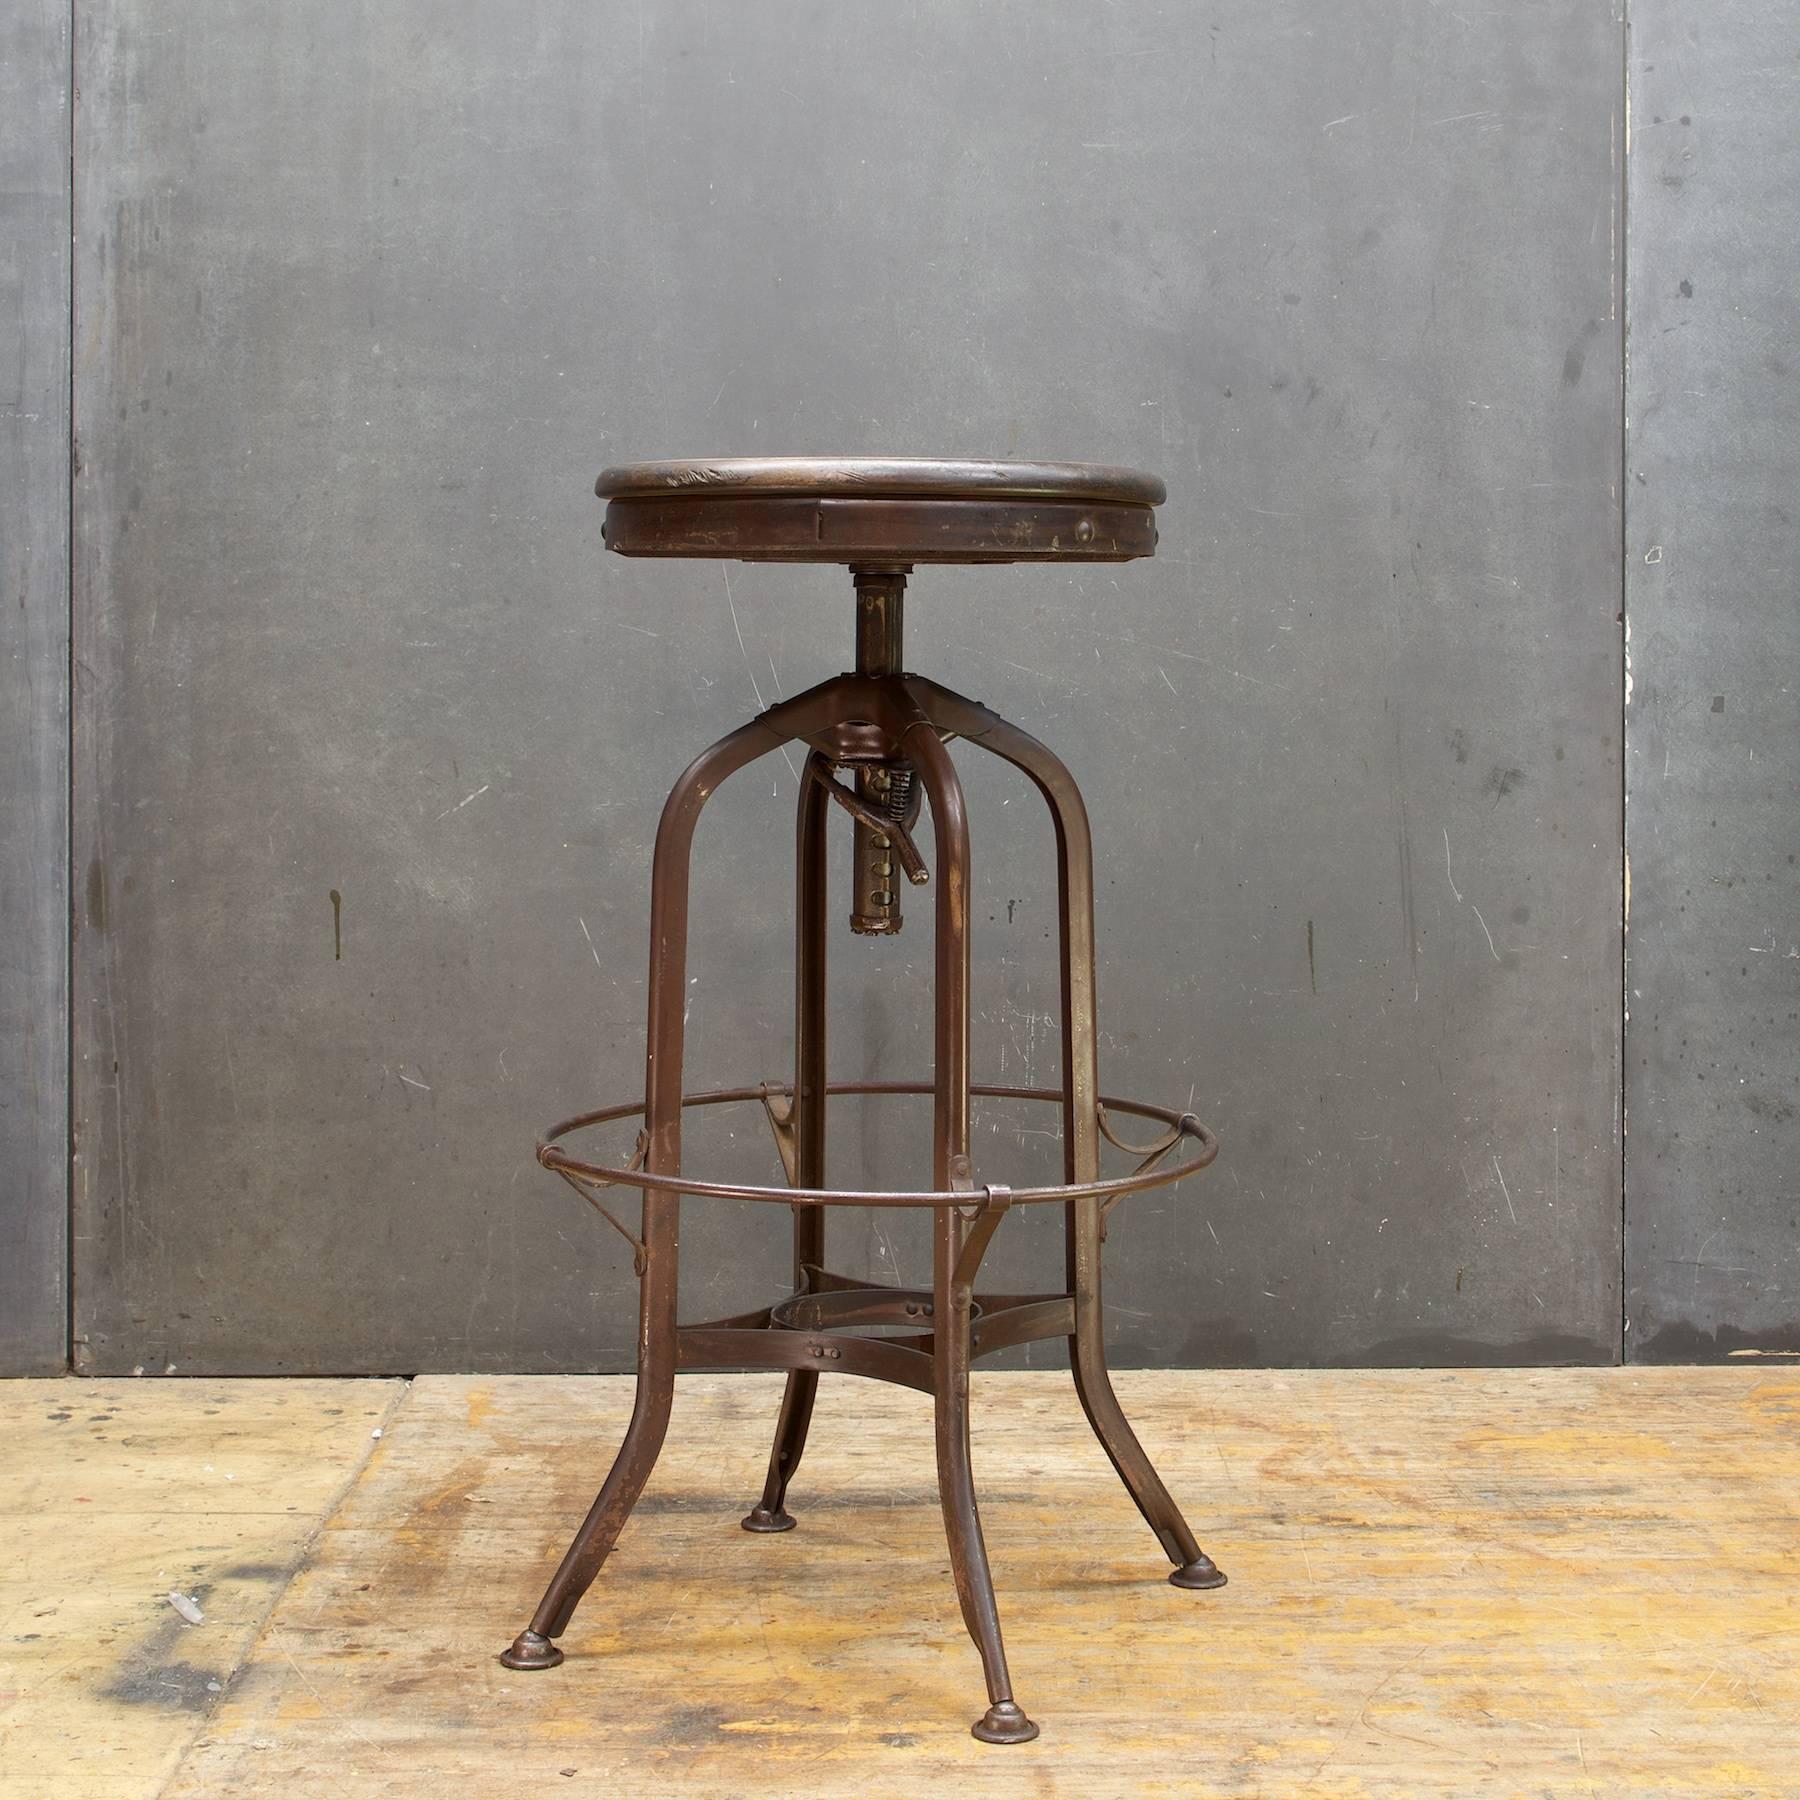 Original and complete. Patina and wear to wooden seat.

Measures: W 18.25 x D 18.25 x H 28.5 to H 33 in. (Seat dia: 15 in).